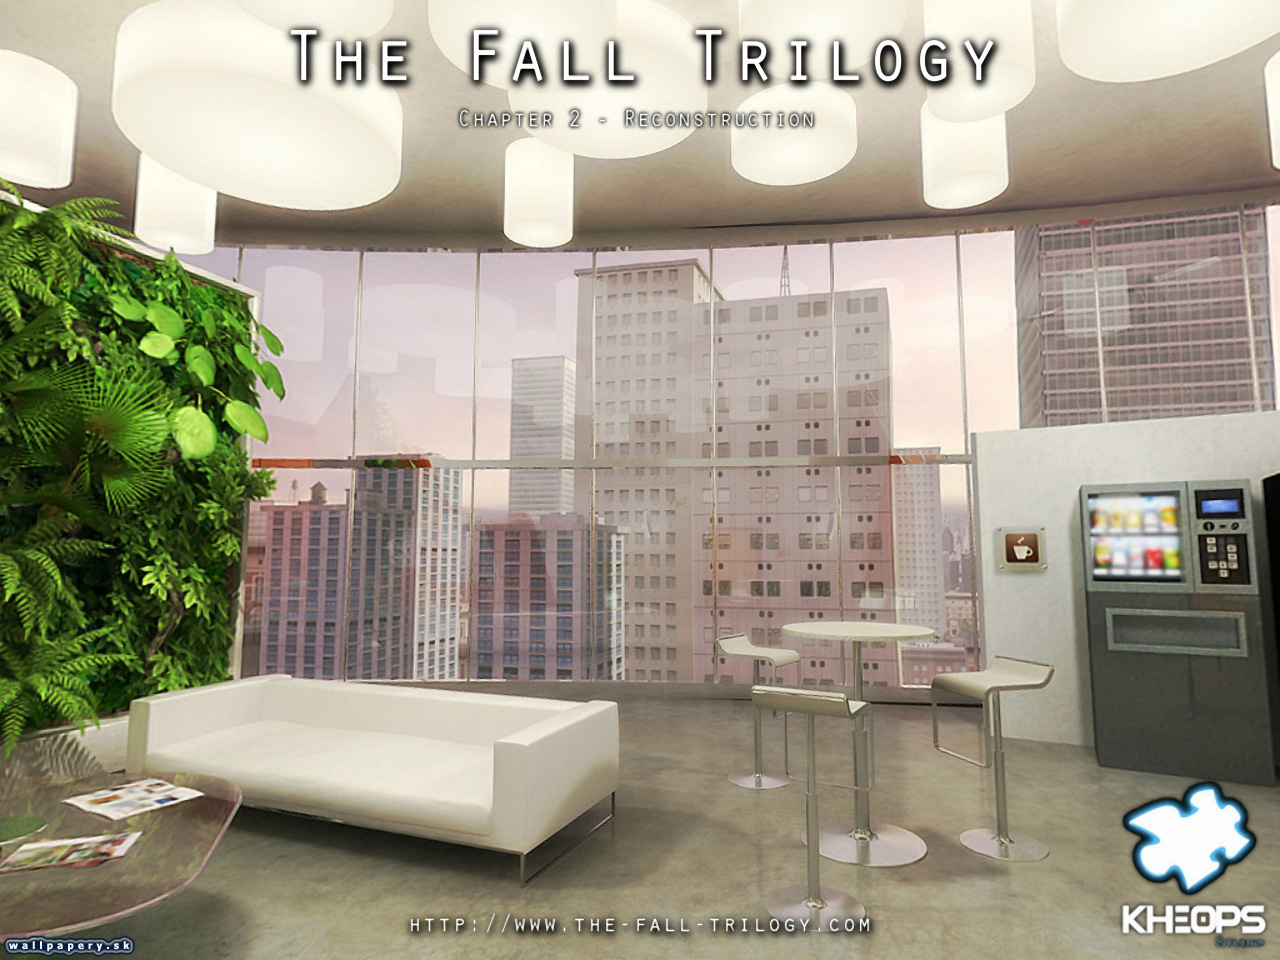 The Fall Trilogy - Chapter 2: Reconstruction - wallpaper 10